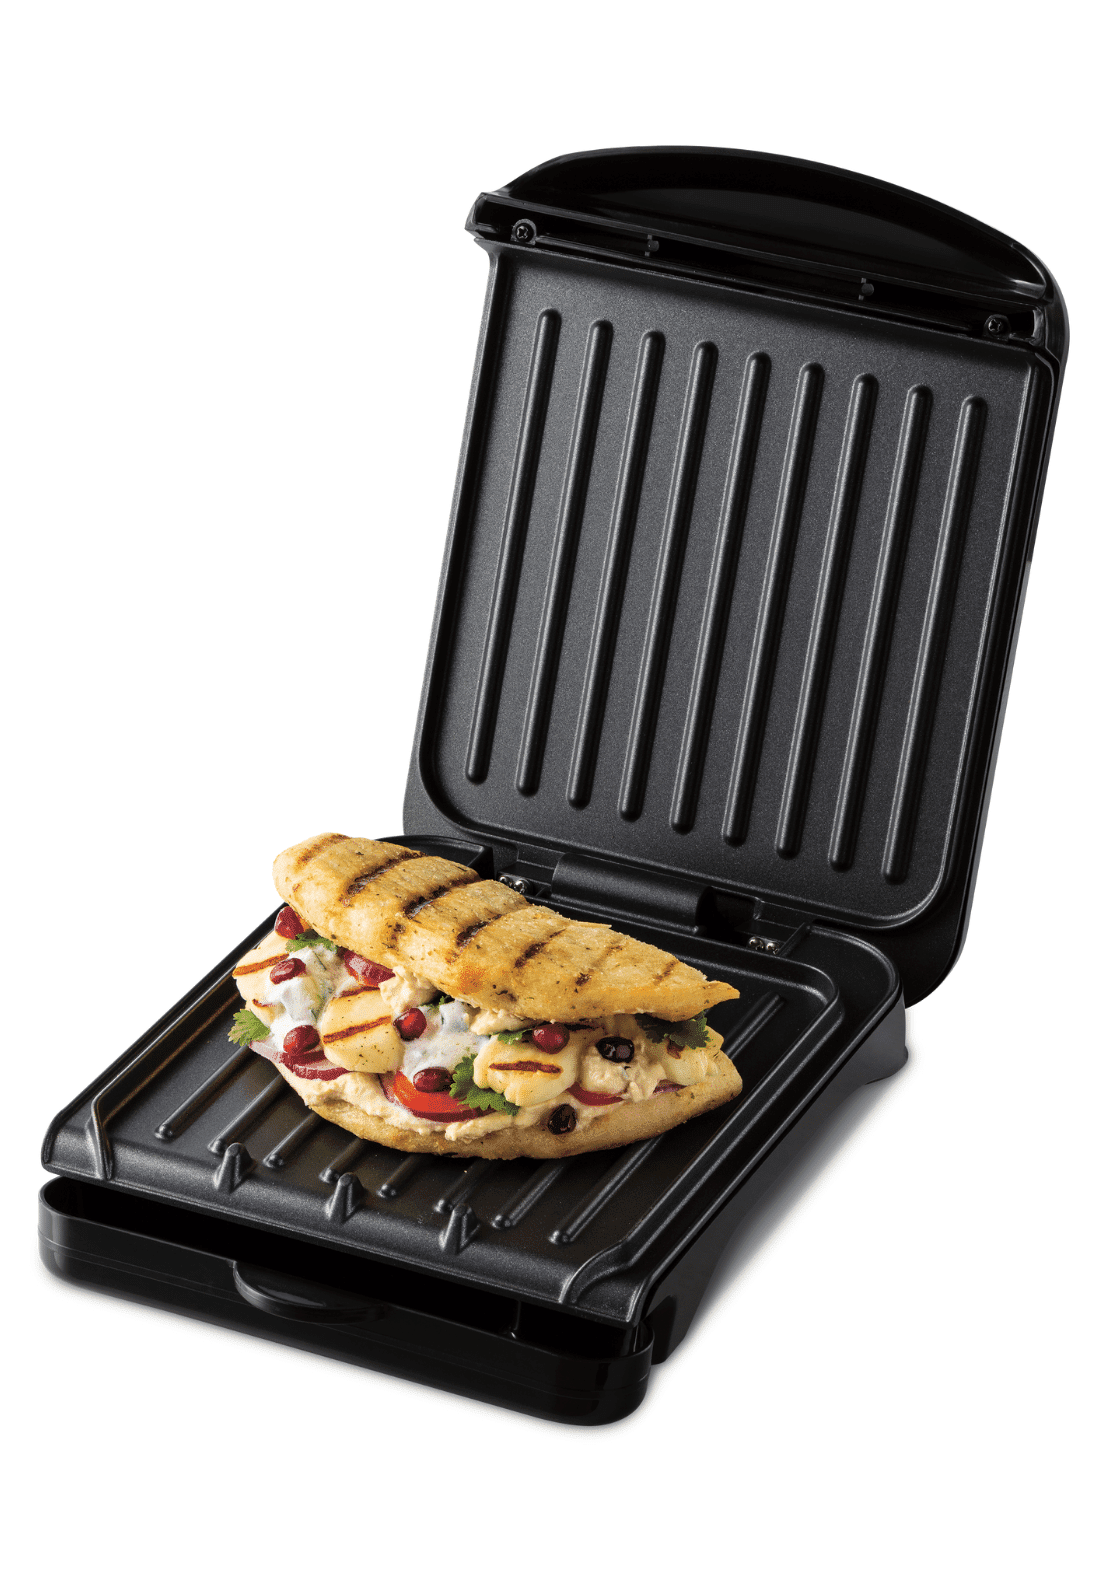 George Foreman Fit Grill Small - Black 1 Shaws Department Stores